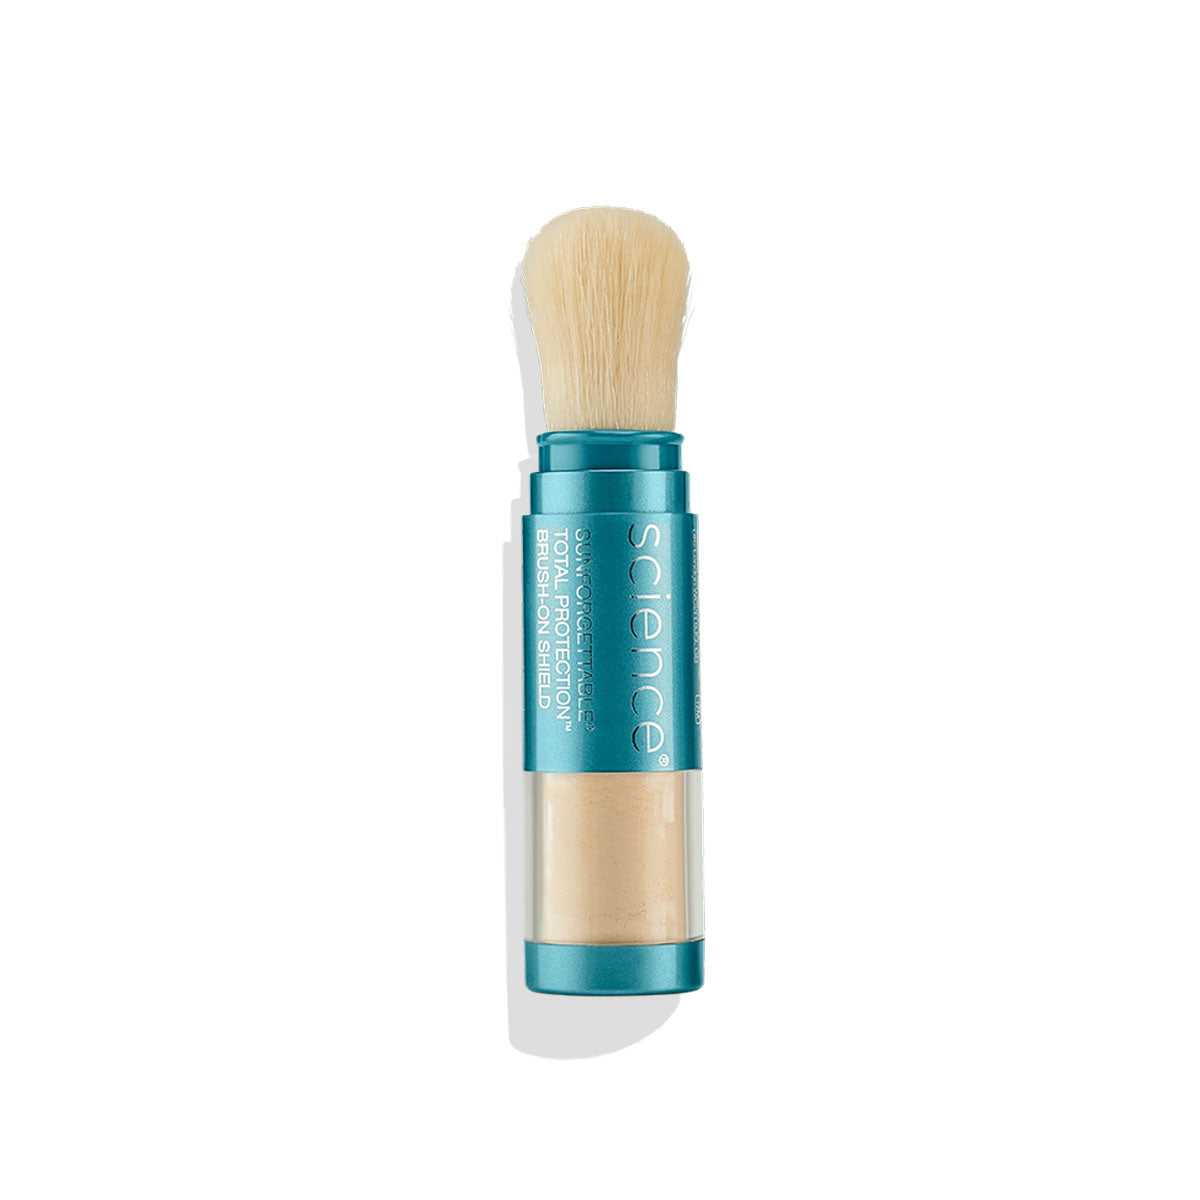 colorescience Products Sunforgettable Total Protection Brush-on Shield SPF 50 fair